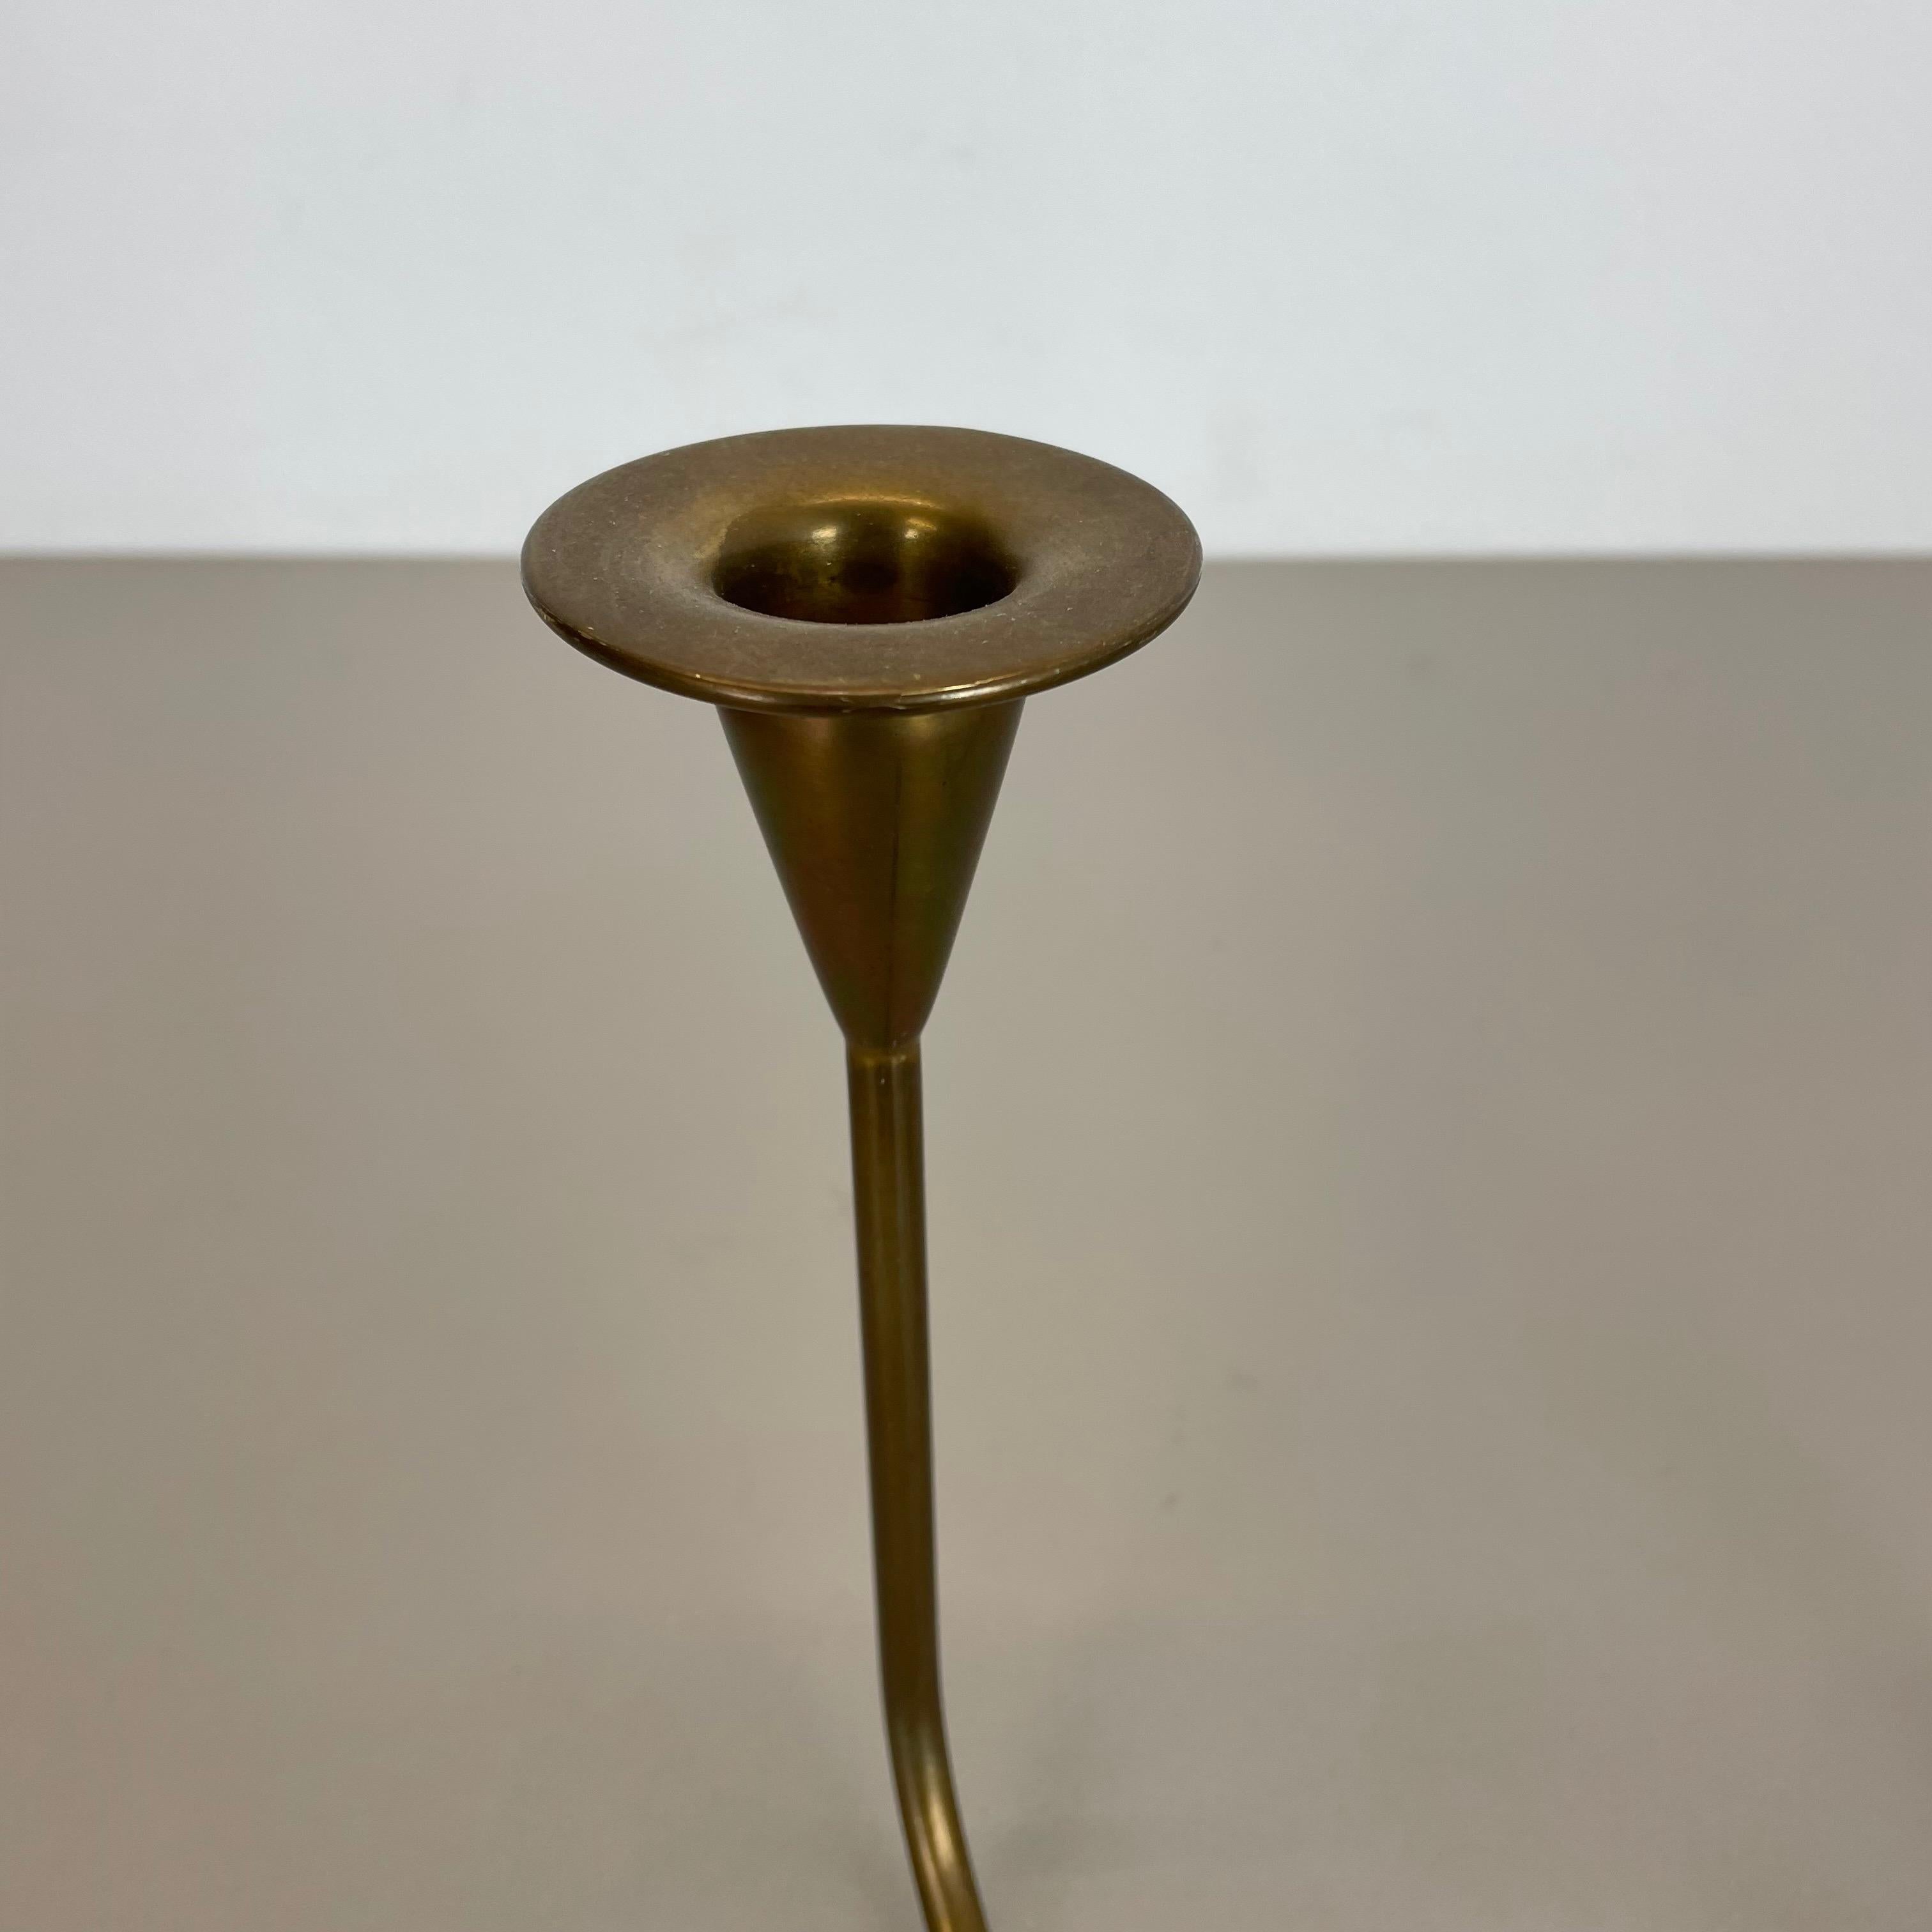 Sculptural Brass Candleholder Object by Günter Kupetz for WMF, Germany 1950s For Sale 5